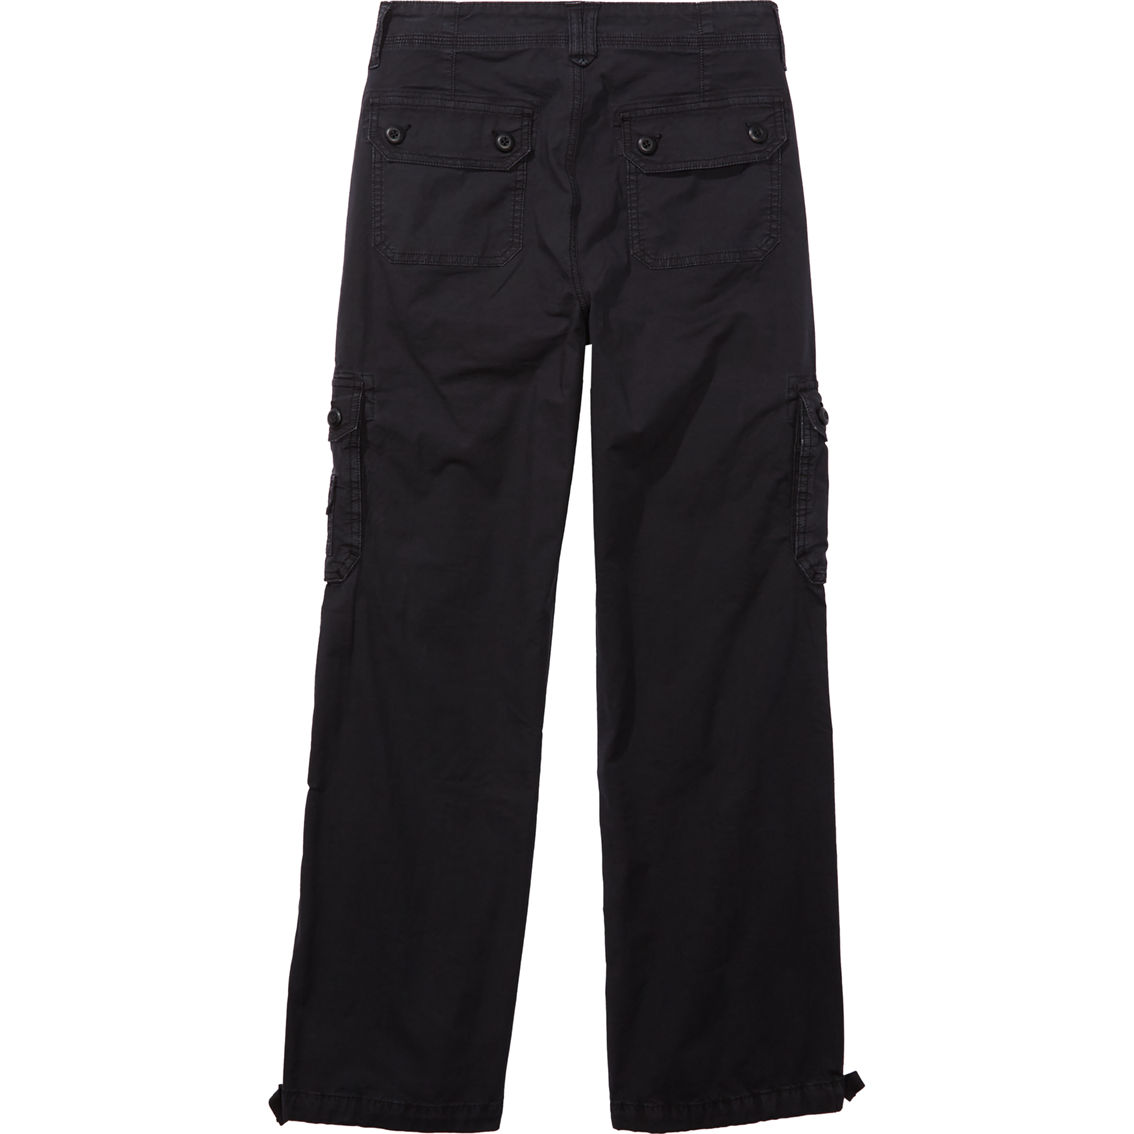 American Eagle Snappy Stretch Baggy Joggers - Image 5 of 5